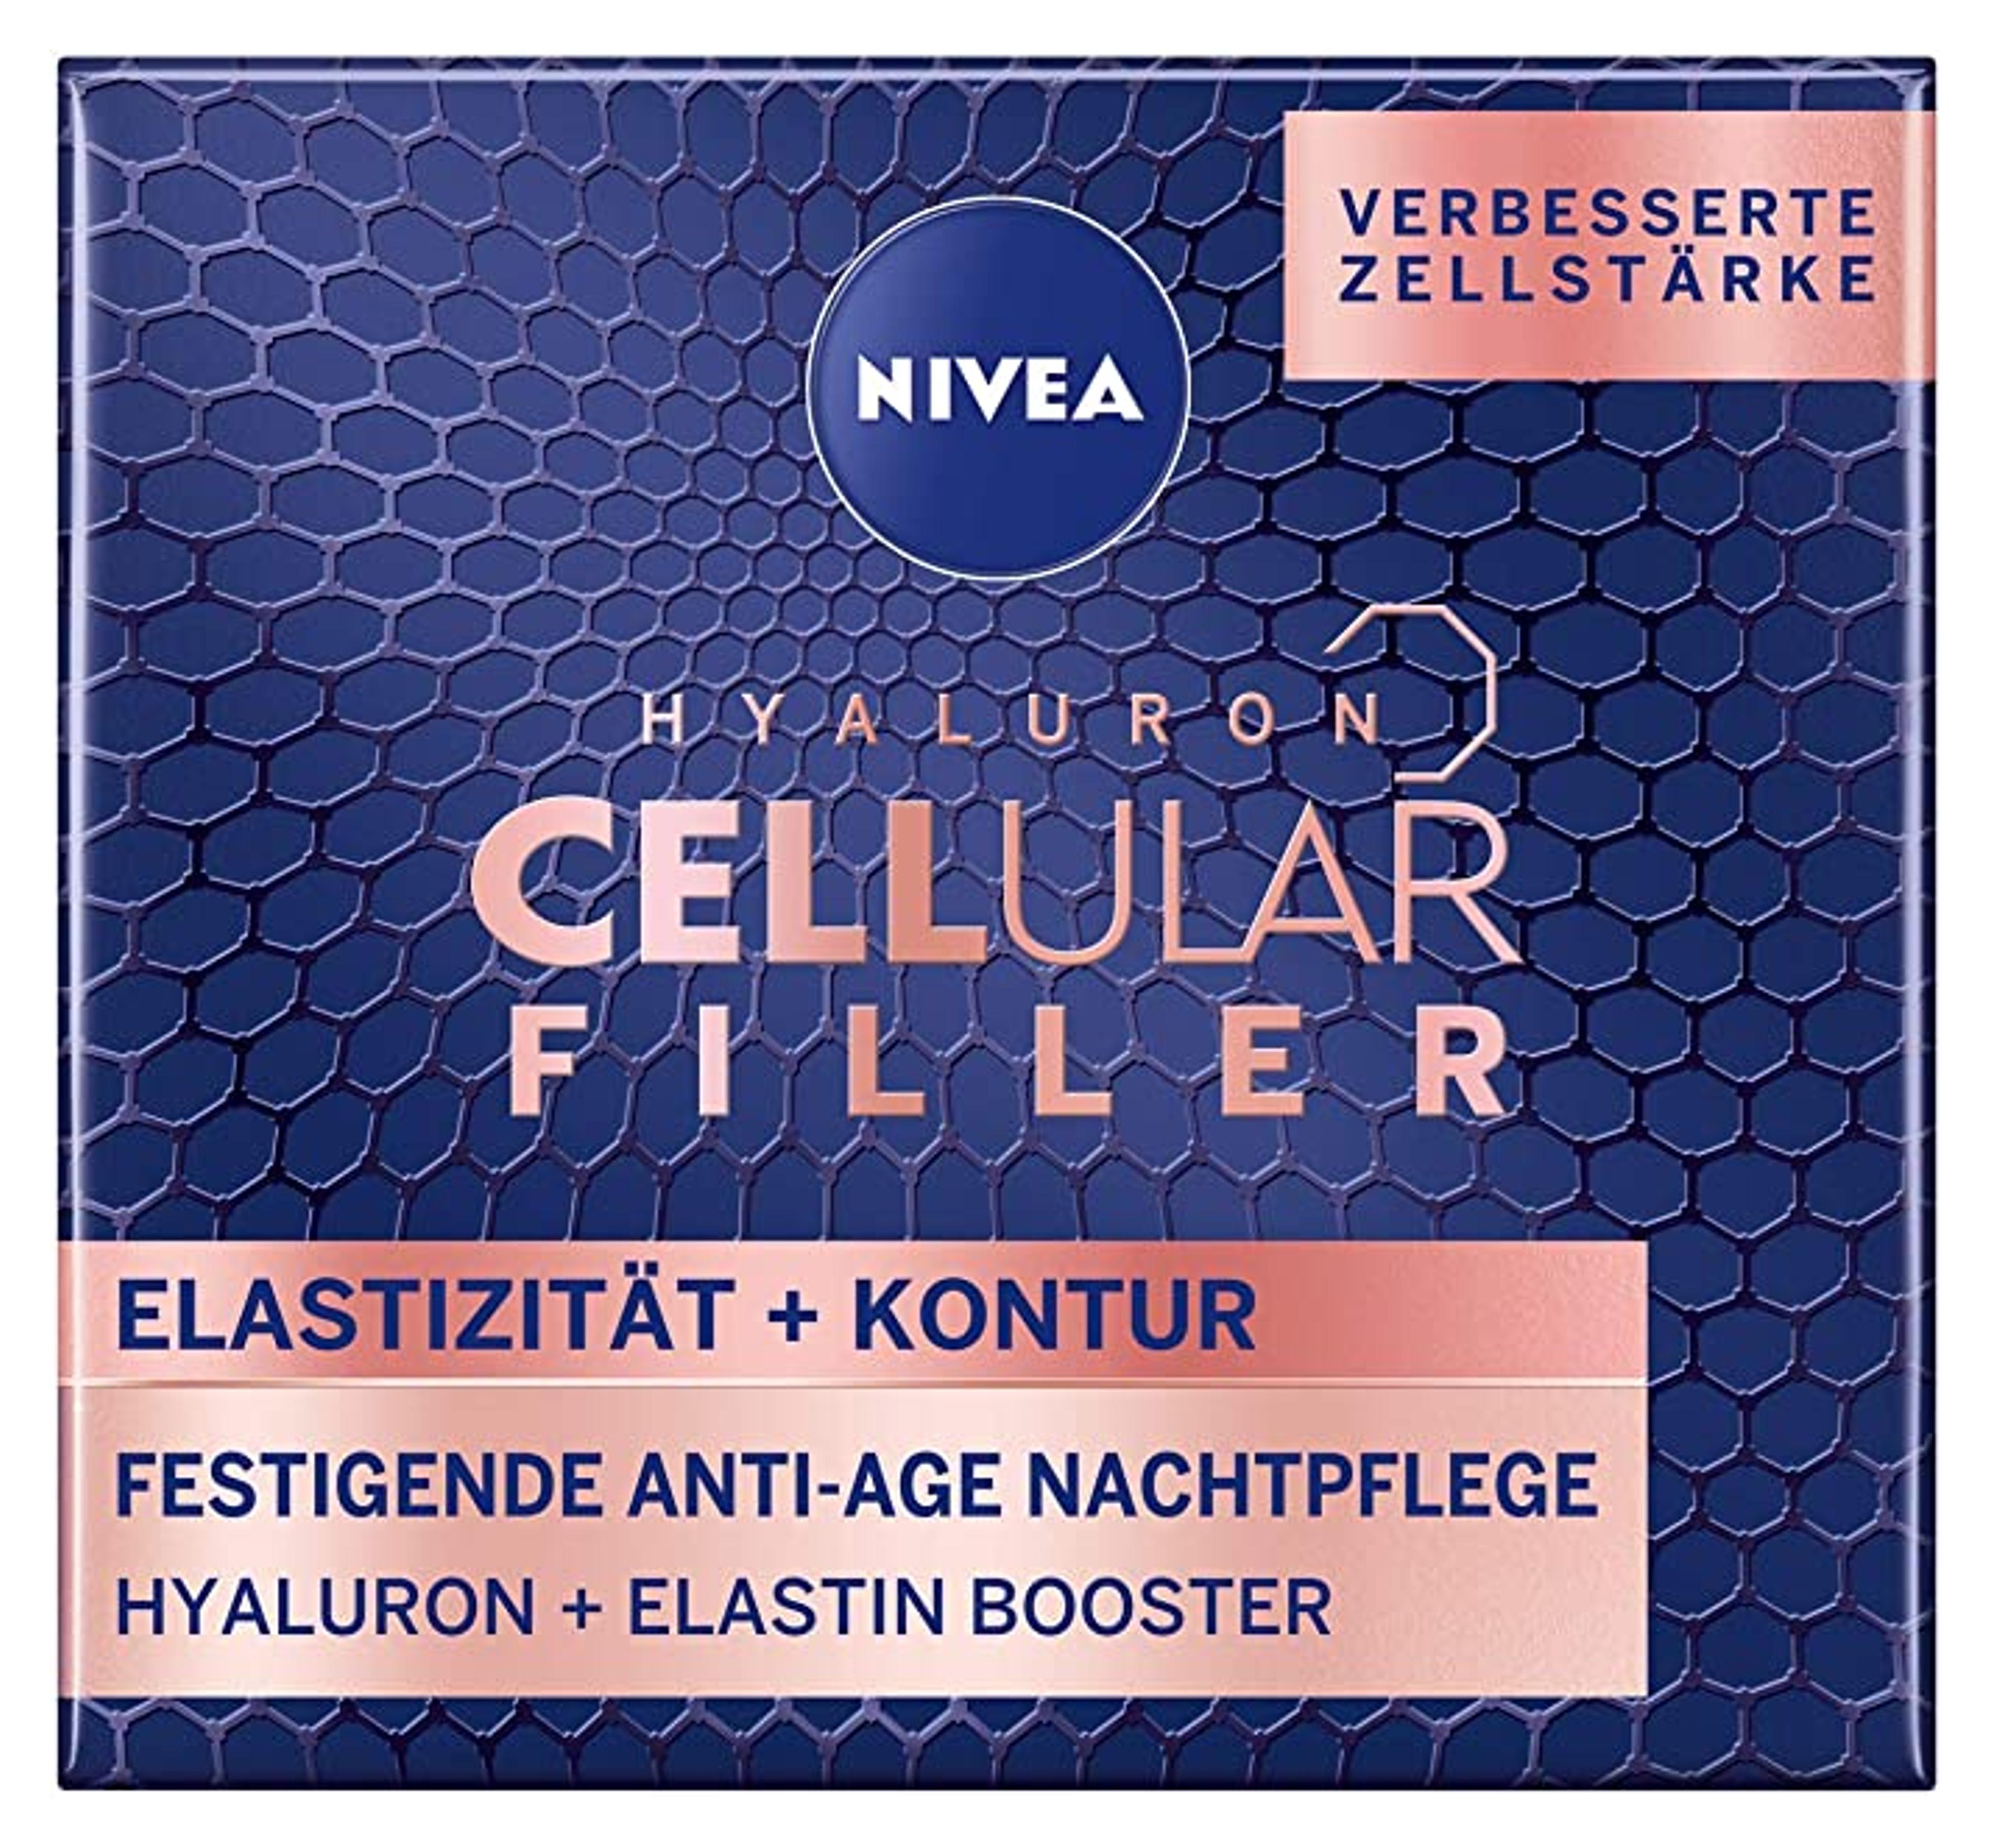 Amazon.com: Nivea Hyaluron Cellular + Elasticity and Contour Night Cream Anti-Wrinkle Night Cream Reduces Wrinkles, Firming Face Cream for Elastic & Strengthened Skin : Beauty & Personal Care